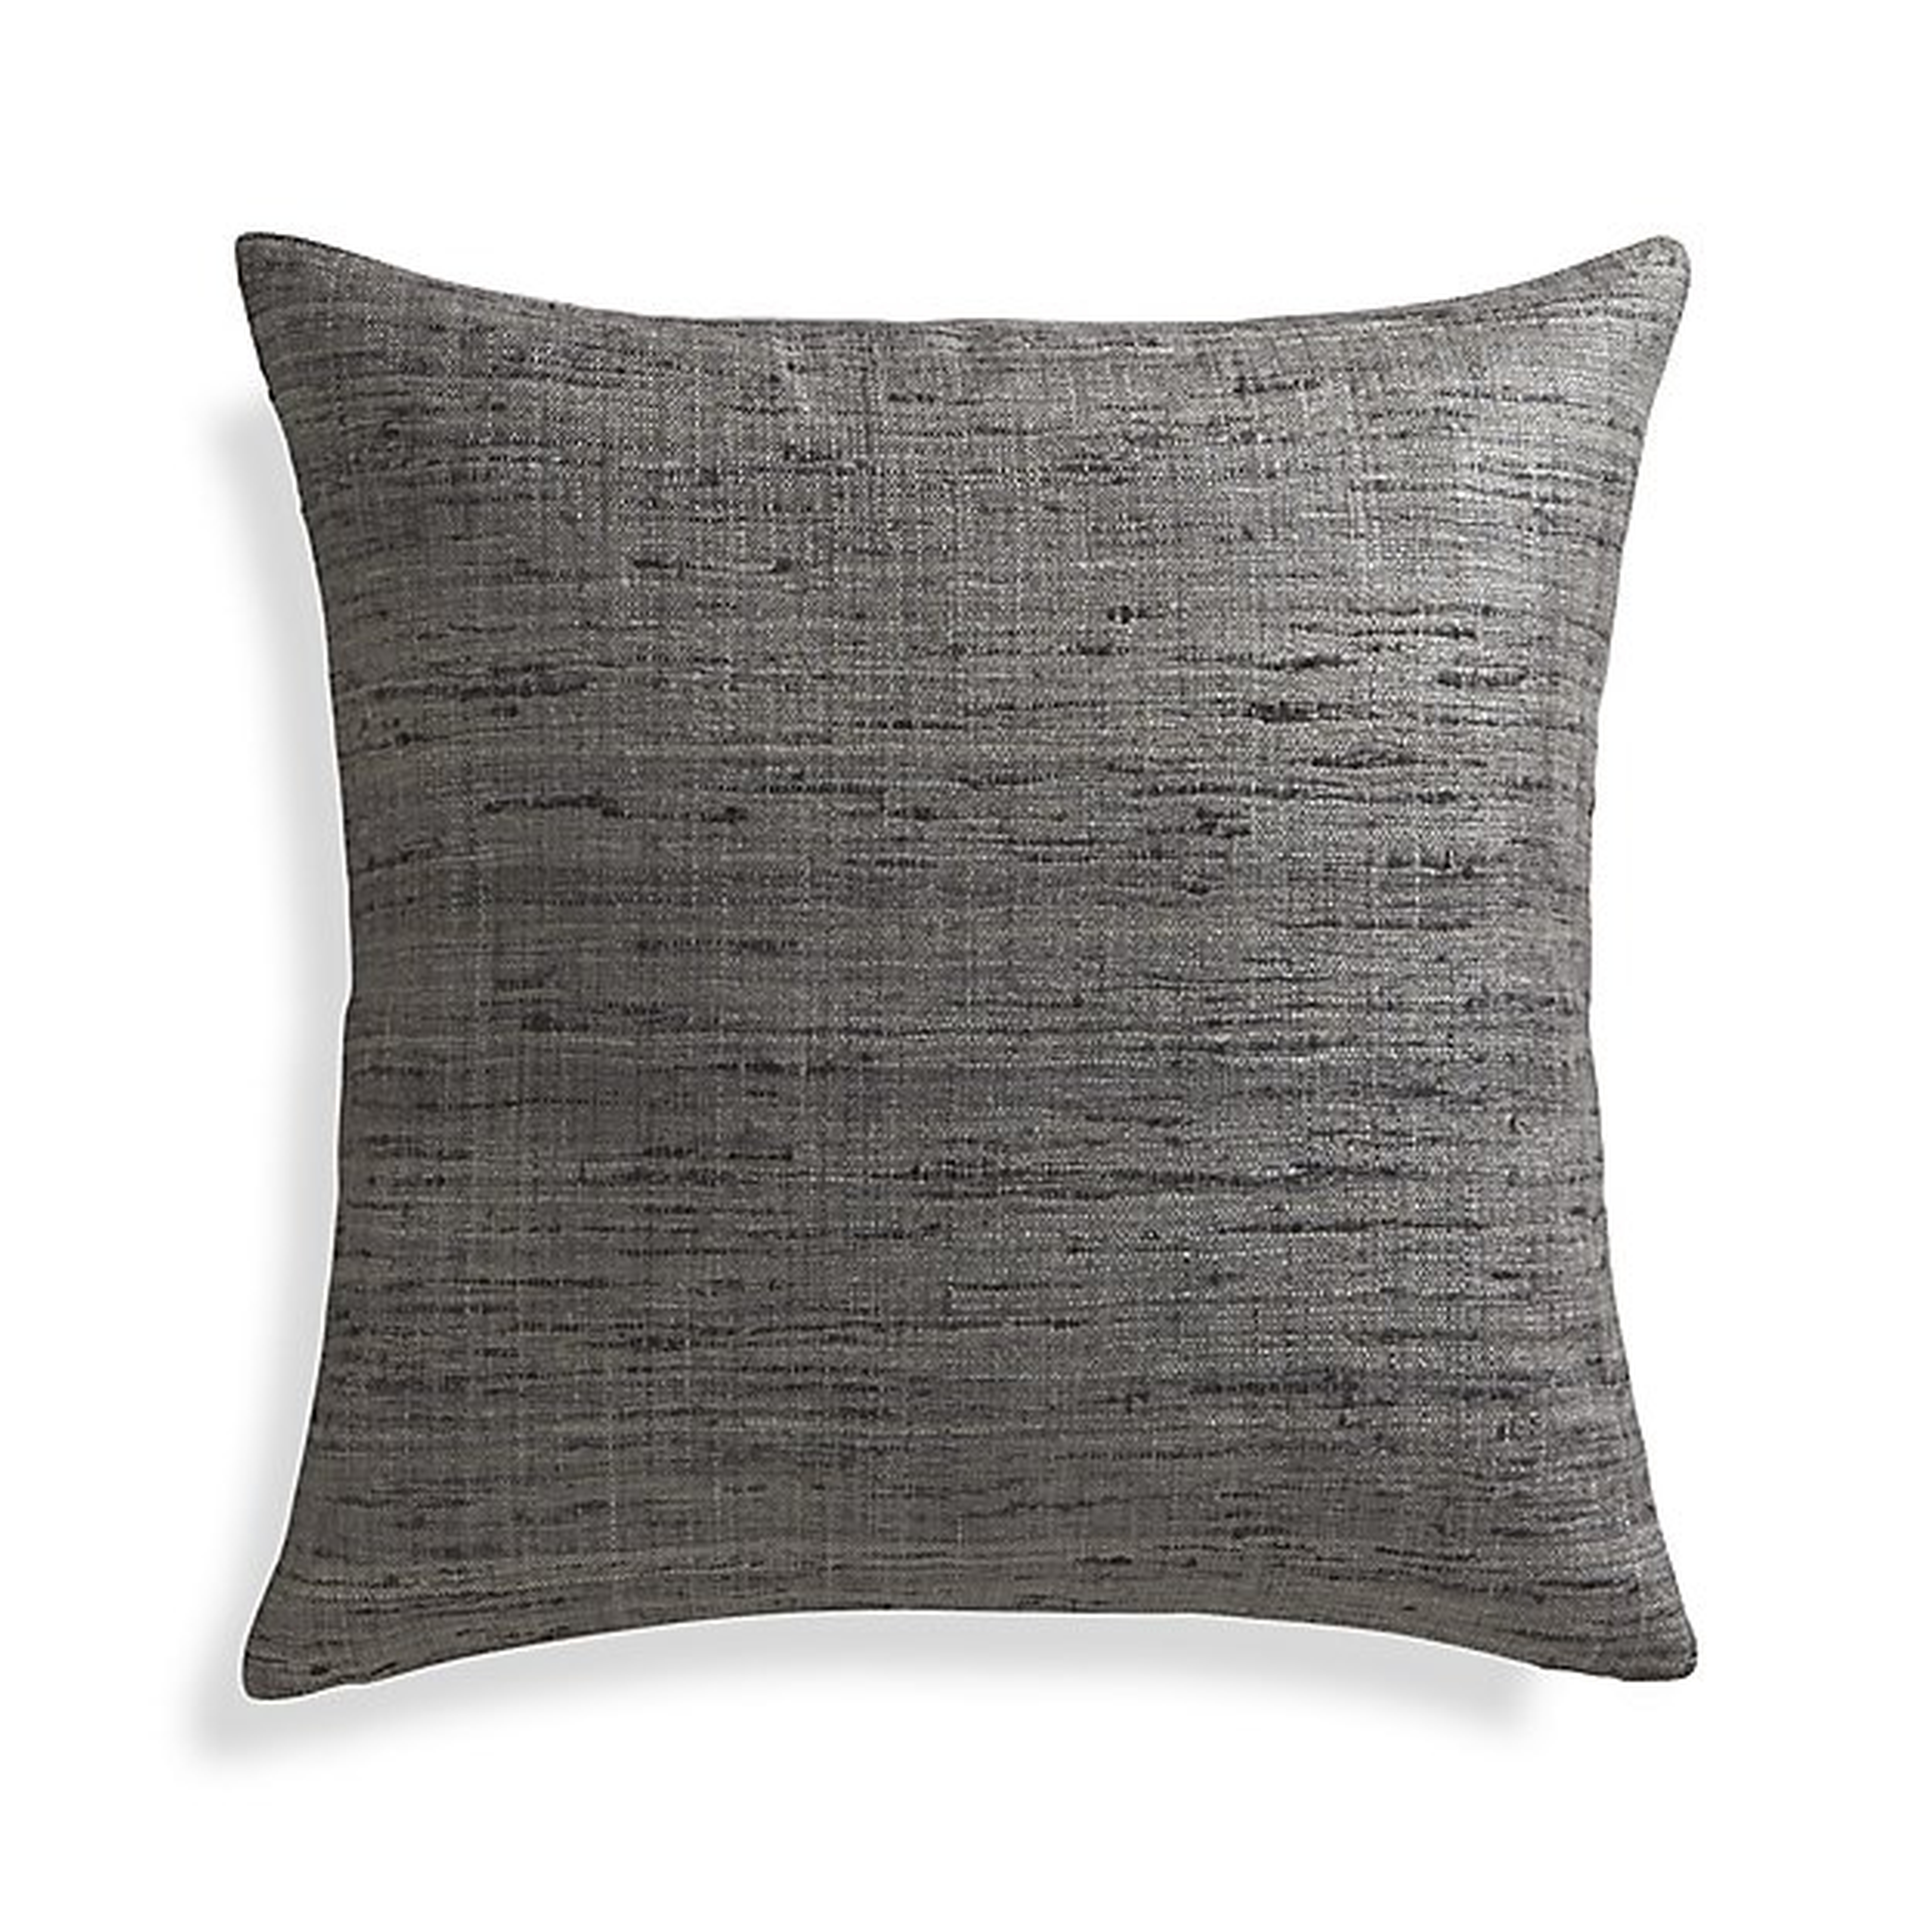 Trevino Nickel Grey 20"l Pillow with Down-Alternative Insert - Crate and Barrel